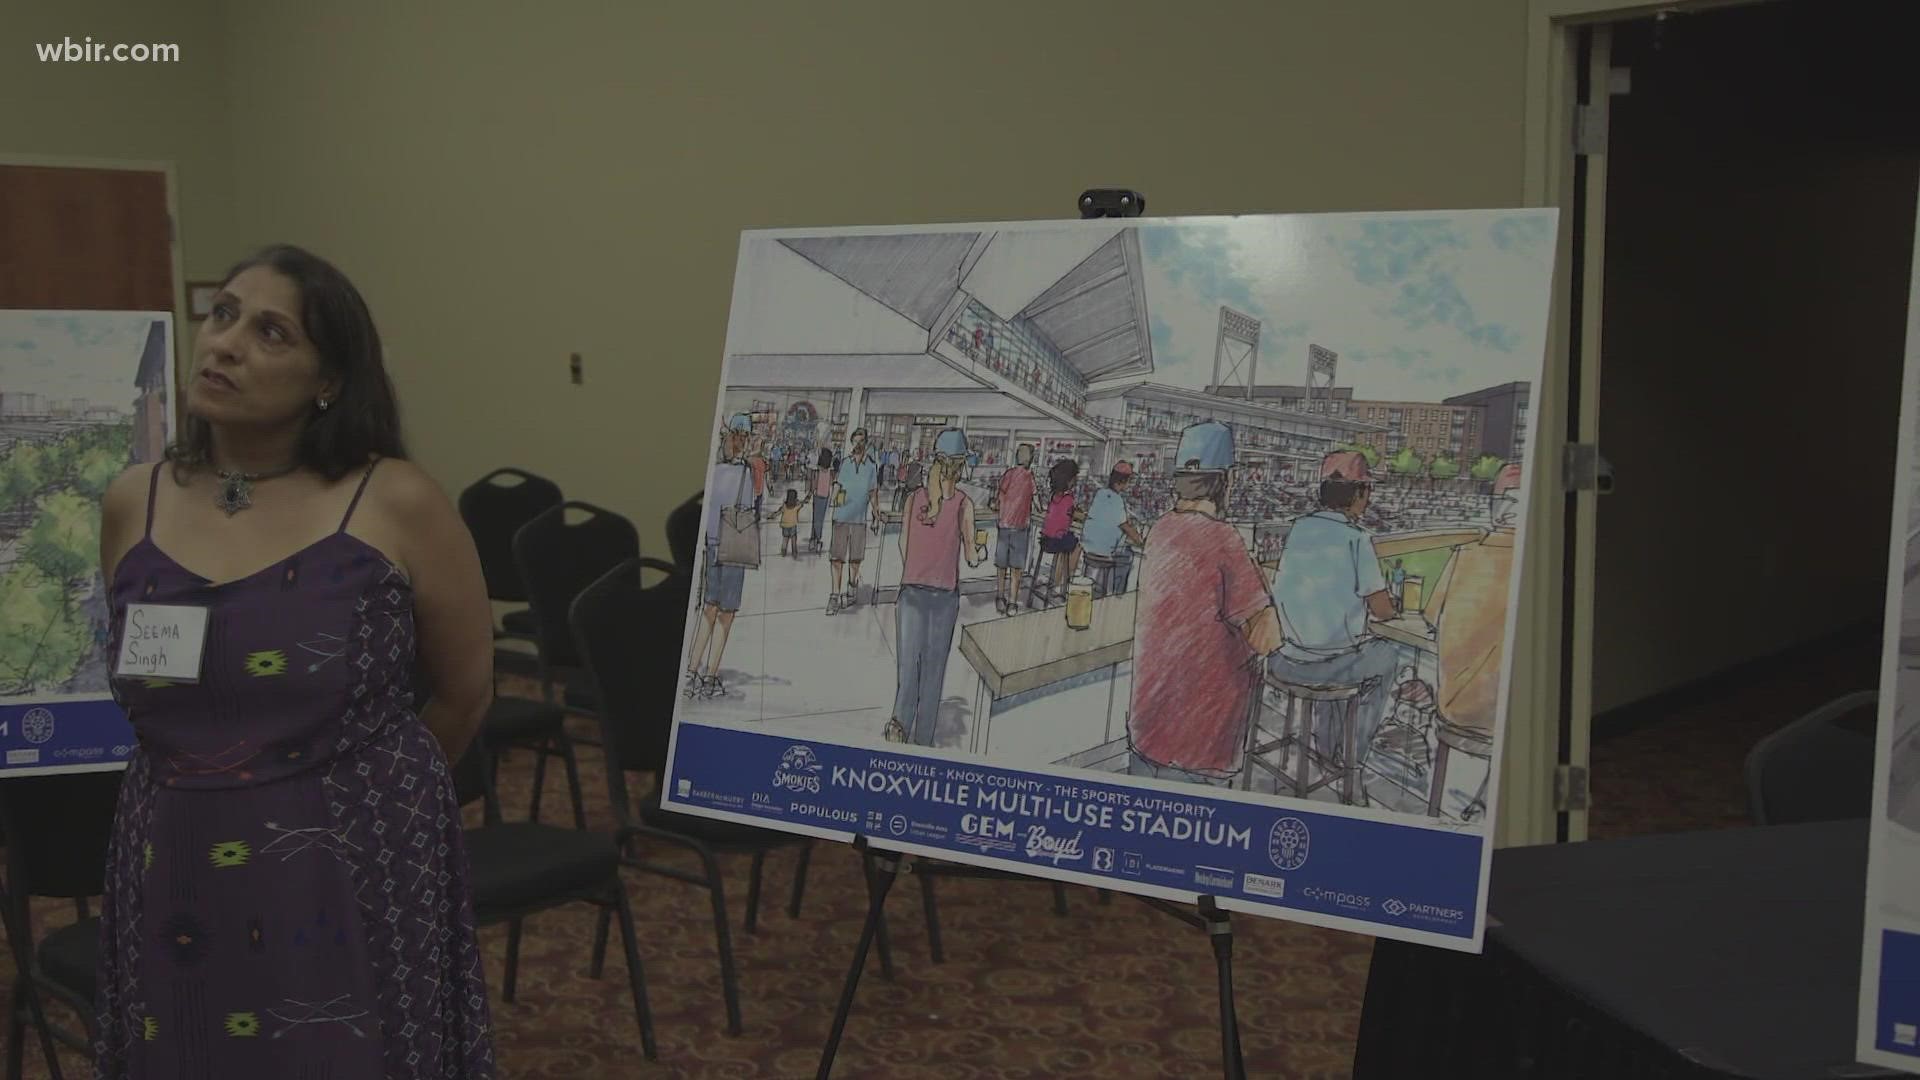 People had the chance to ask city staff and members of the Sports Authority Board questions about the project during an information event on Saturday.